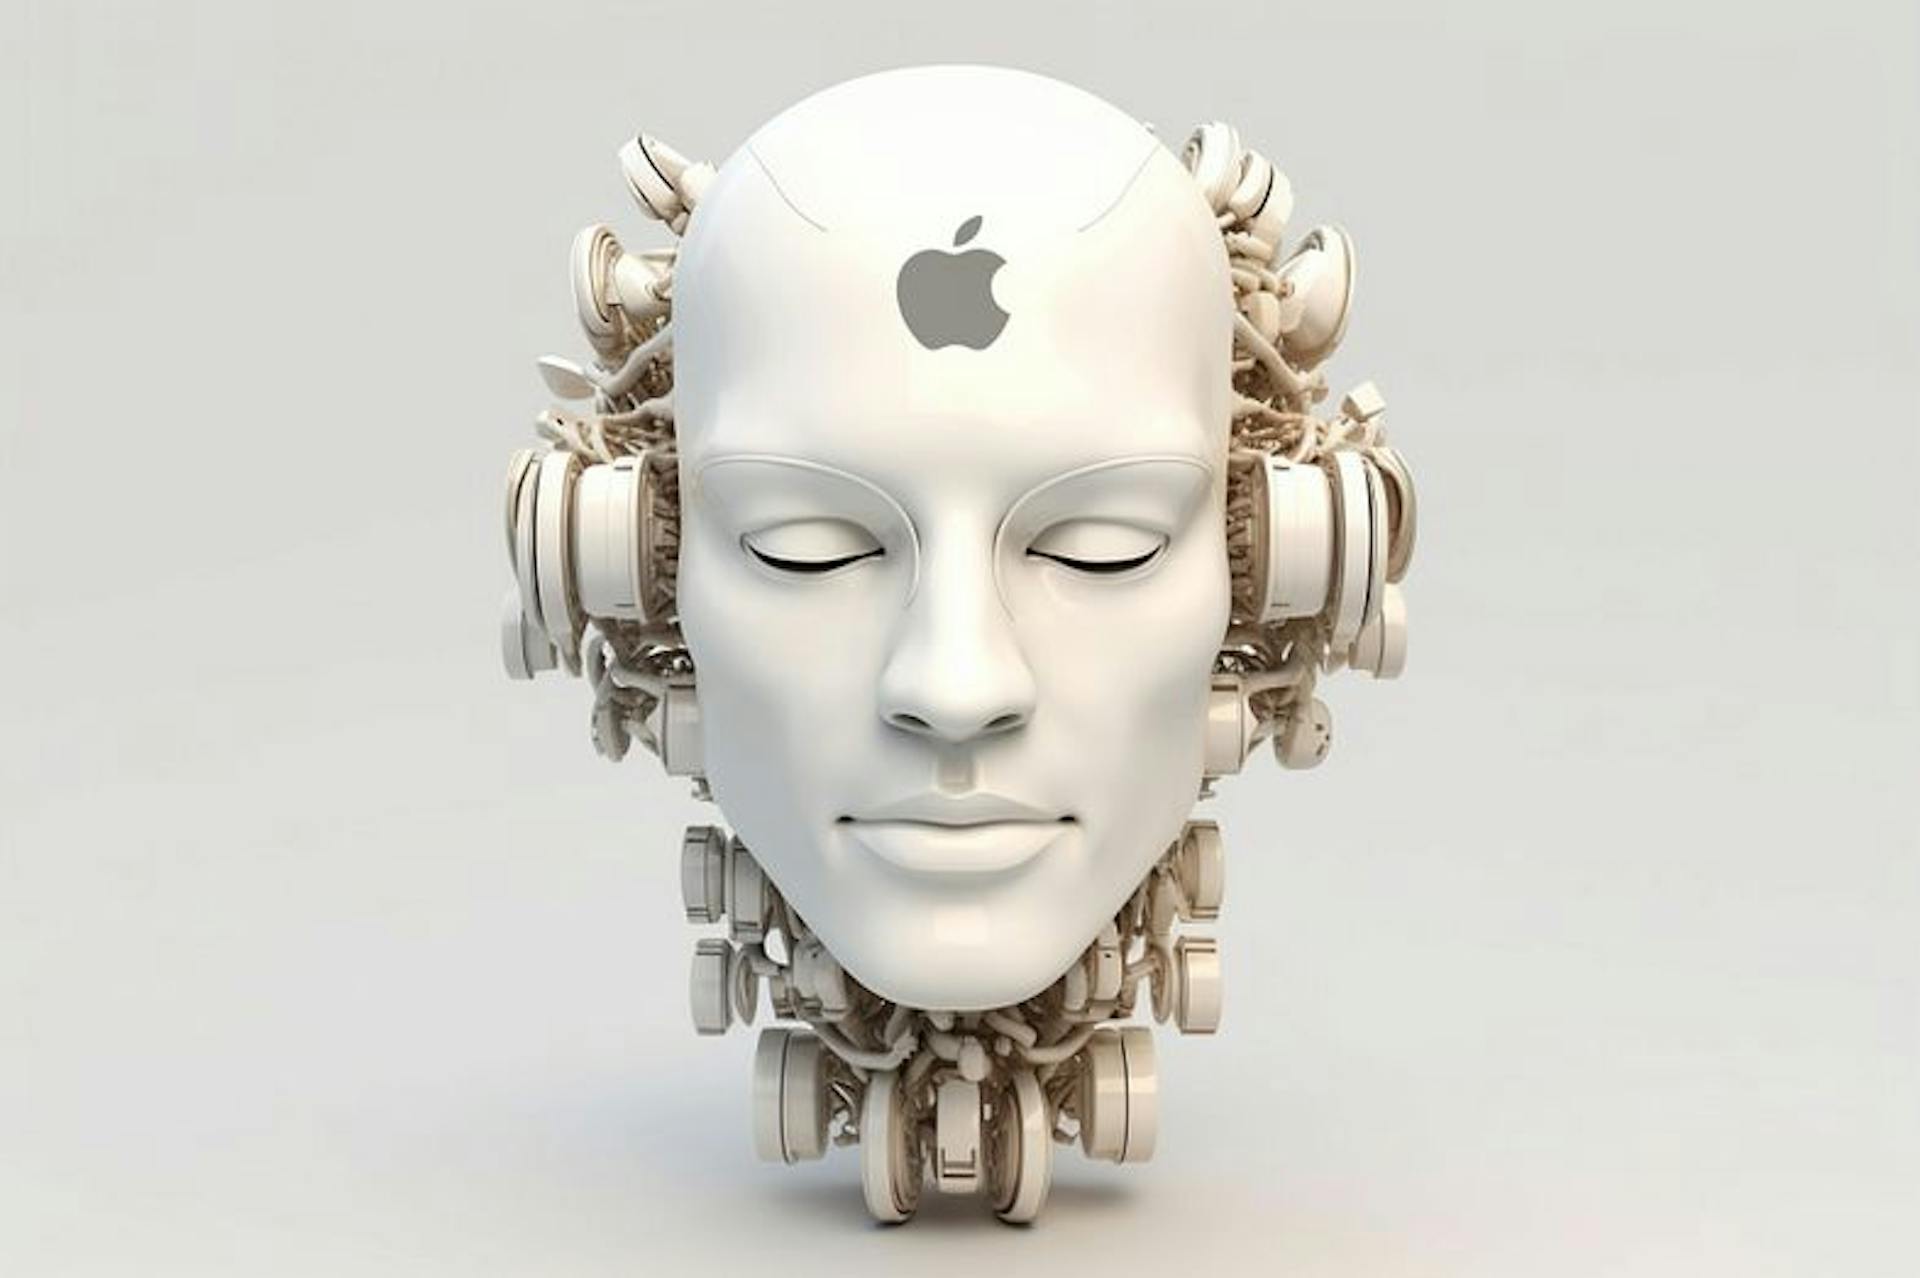 featured image - Apple Quietly Takes a Bite of the AI Cherry